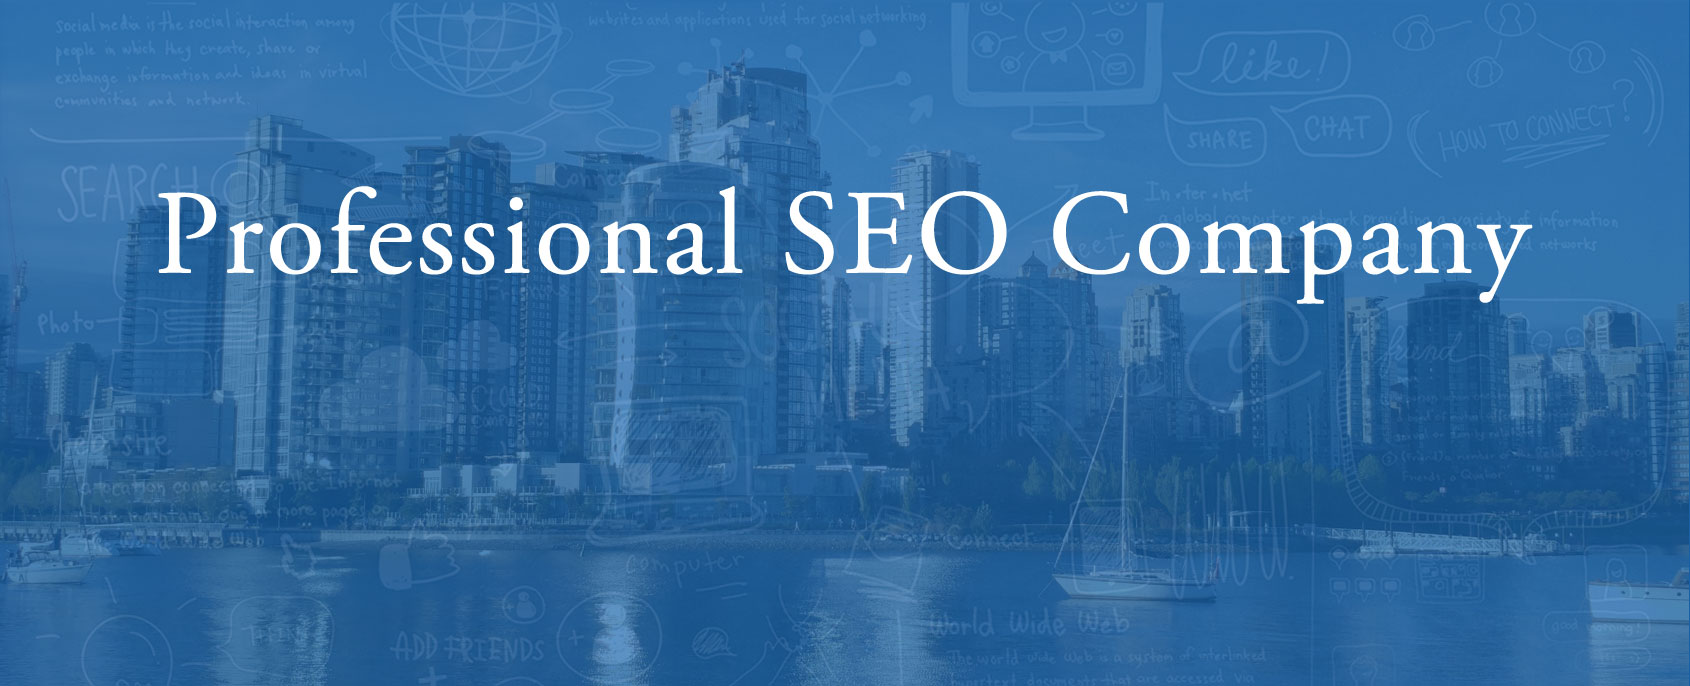 What Makes Professional SEO Company Different Than Traditional SEO Company?